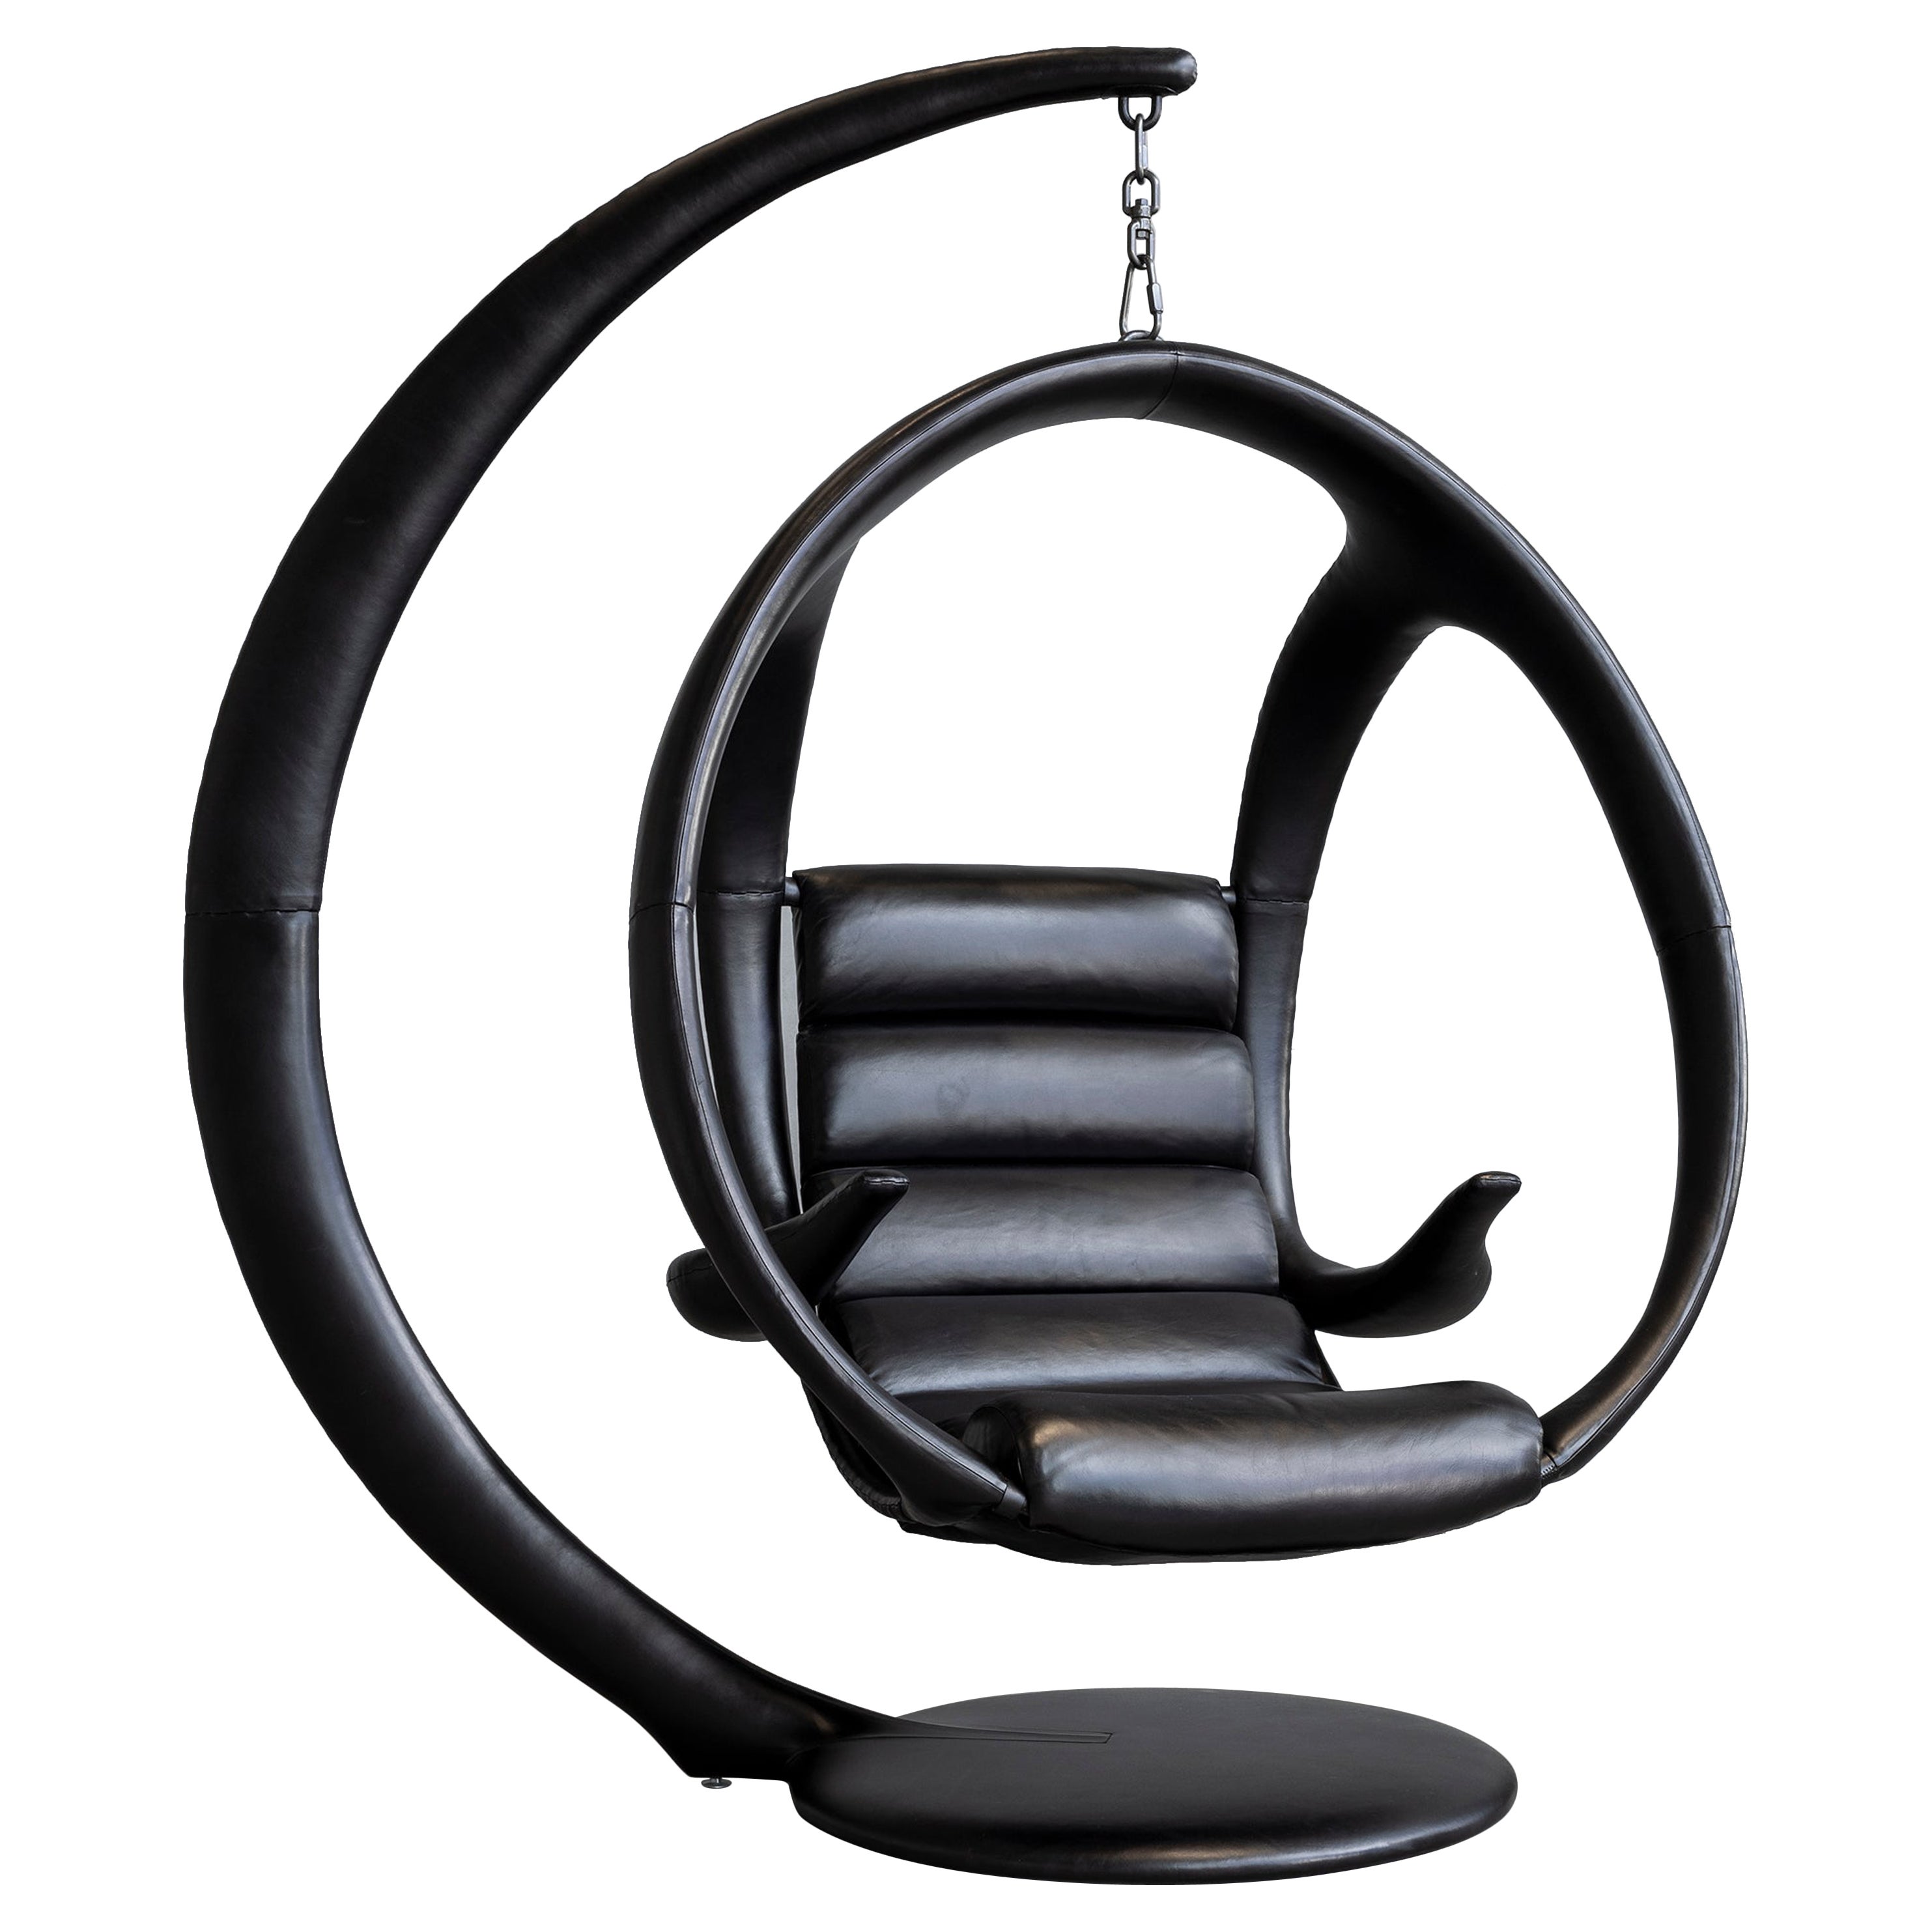 William Emmerson "Ab Ovo" Leather Hanging Pod Chair For Sale